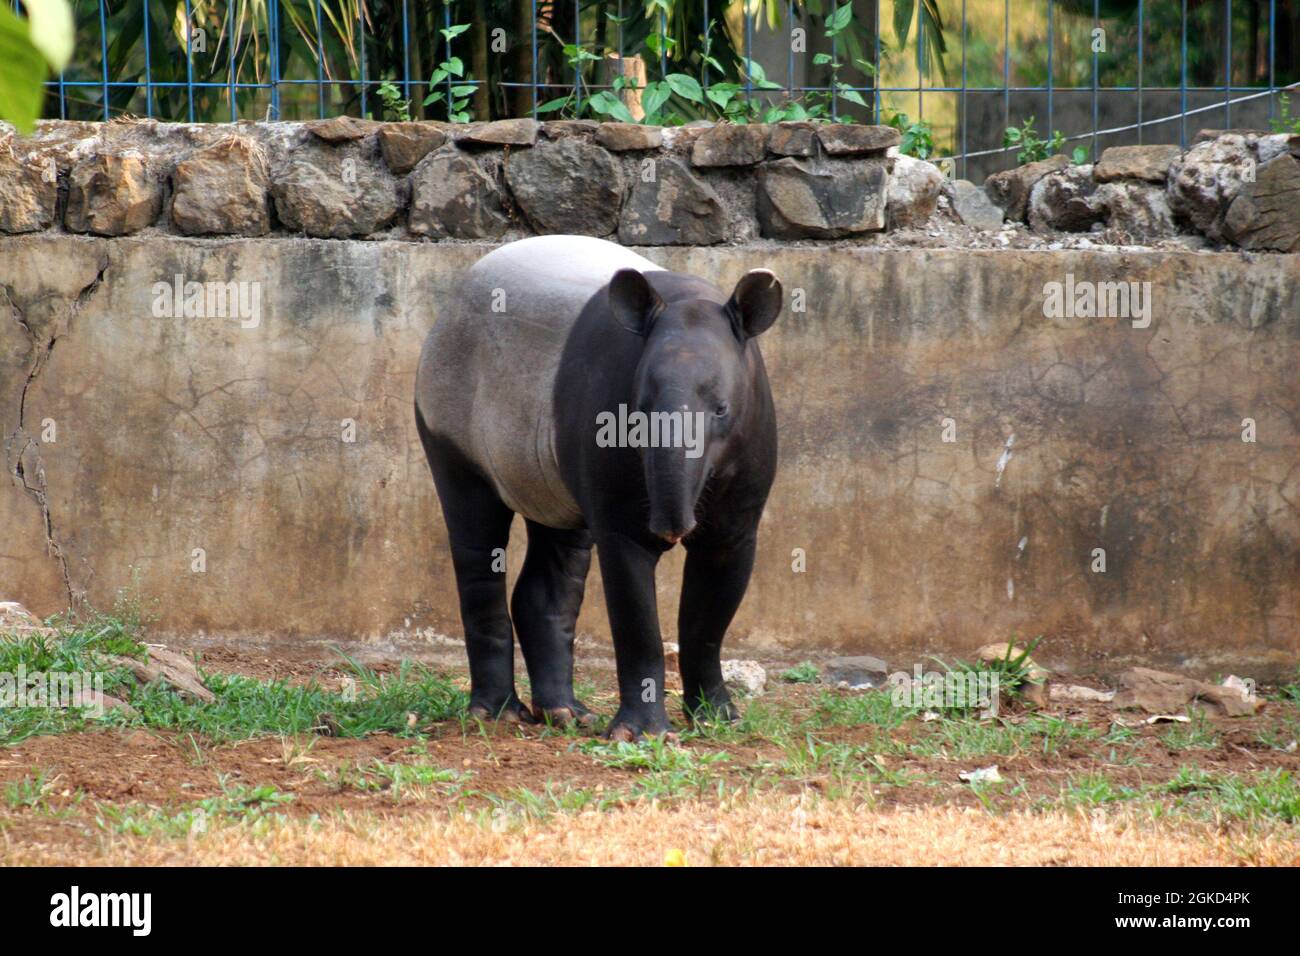 Tapir. A tapir is a large, herbivorous mammal, similar in shape to a pig, with a short, prehensile nose trunk. Stock Photo